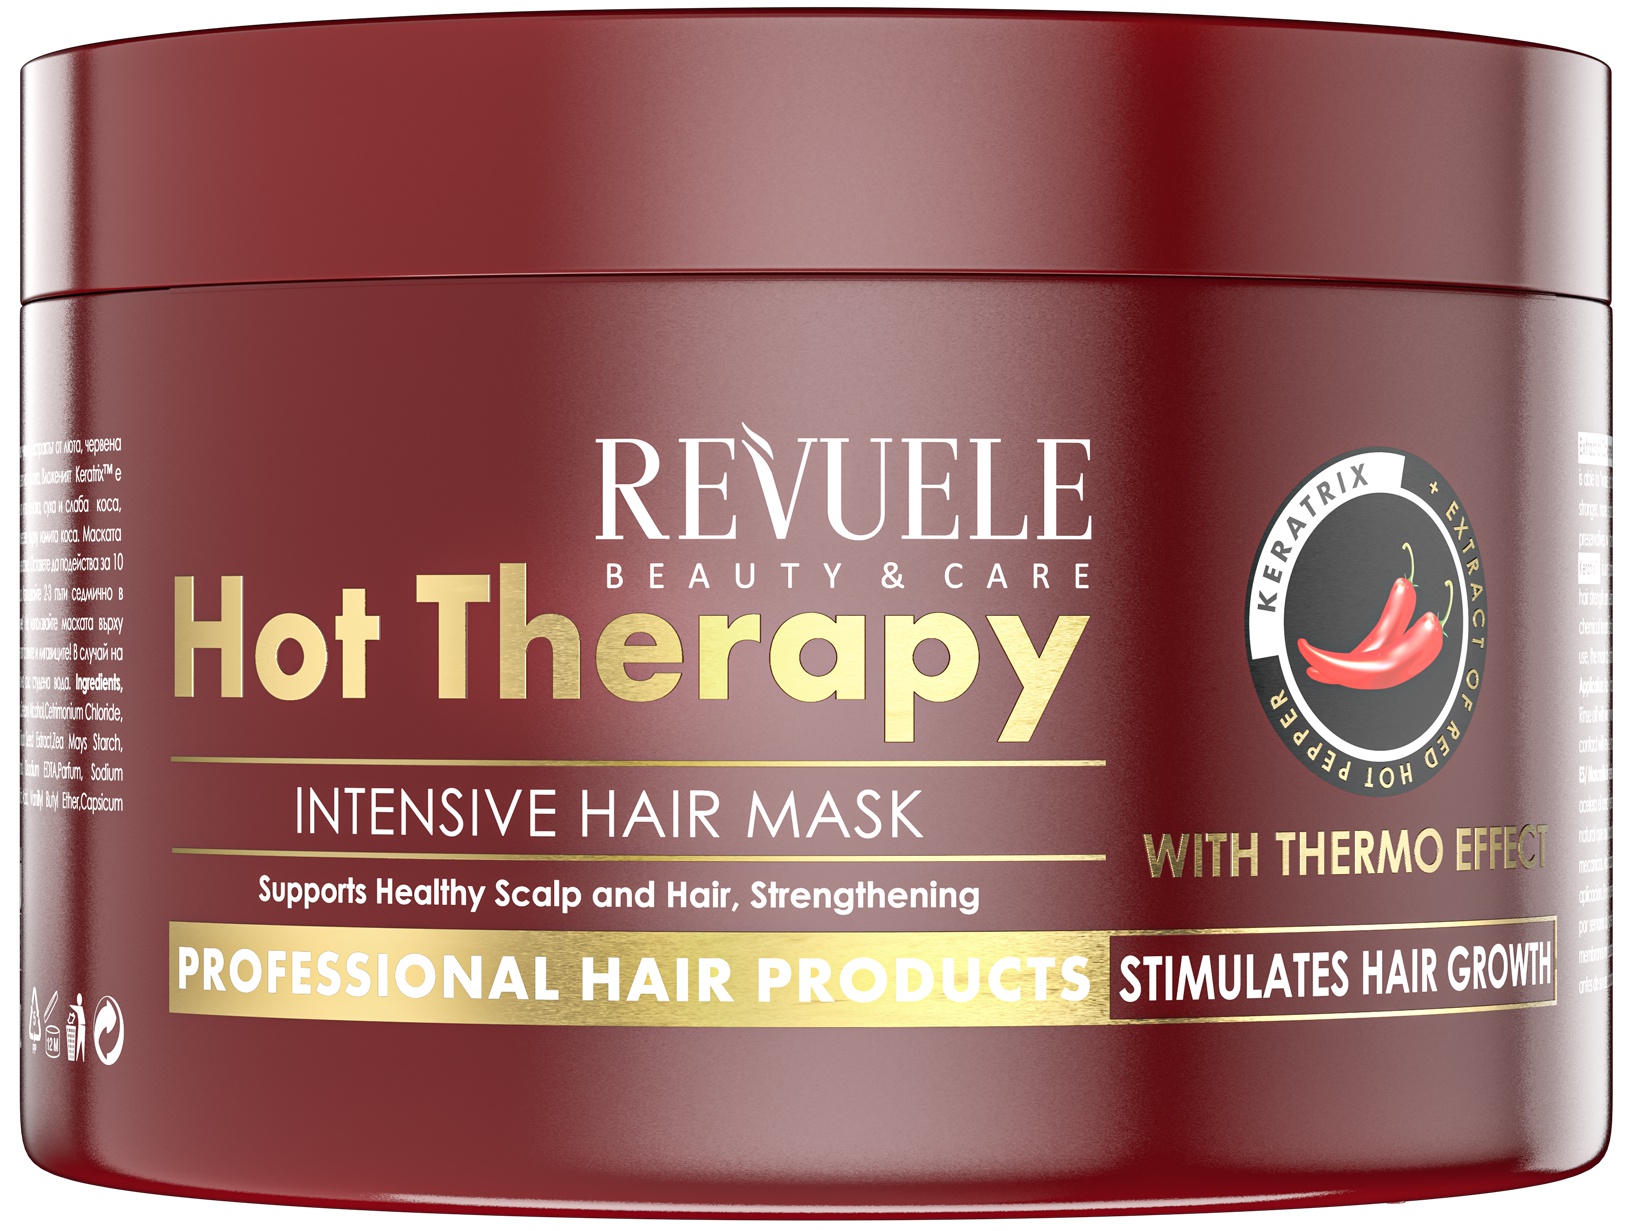 Revuele Hot Therapy Intensive Hair Mask